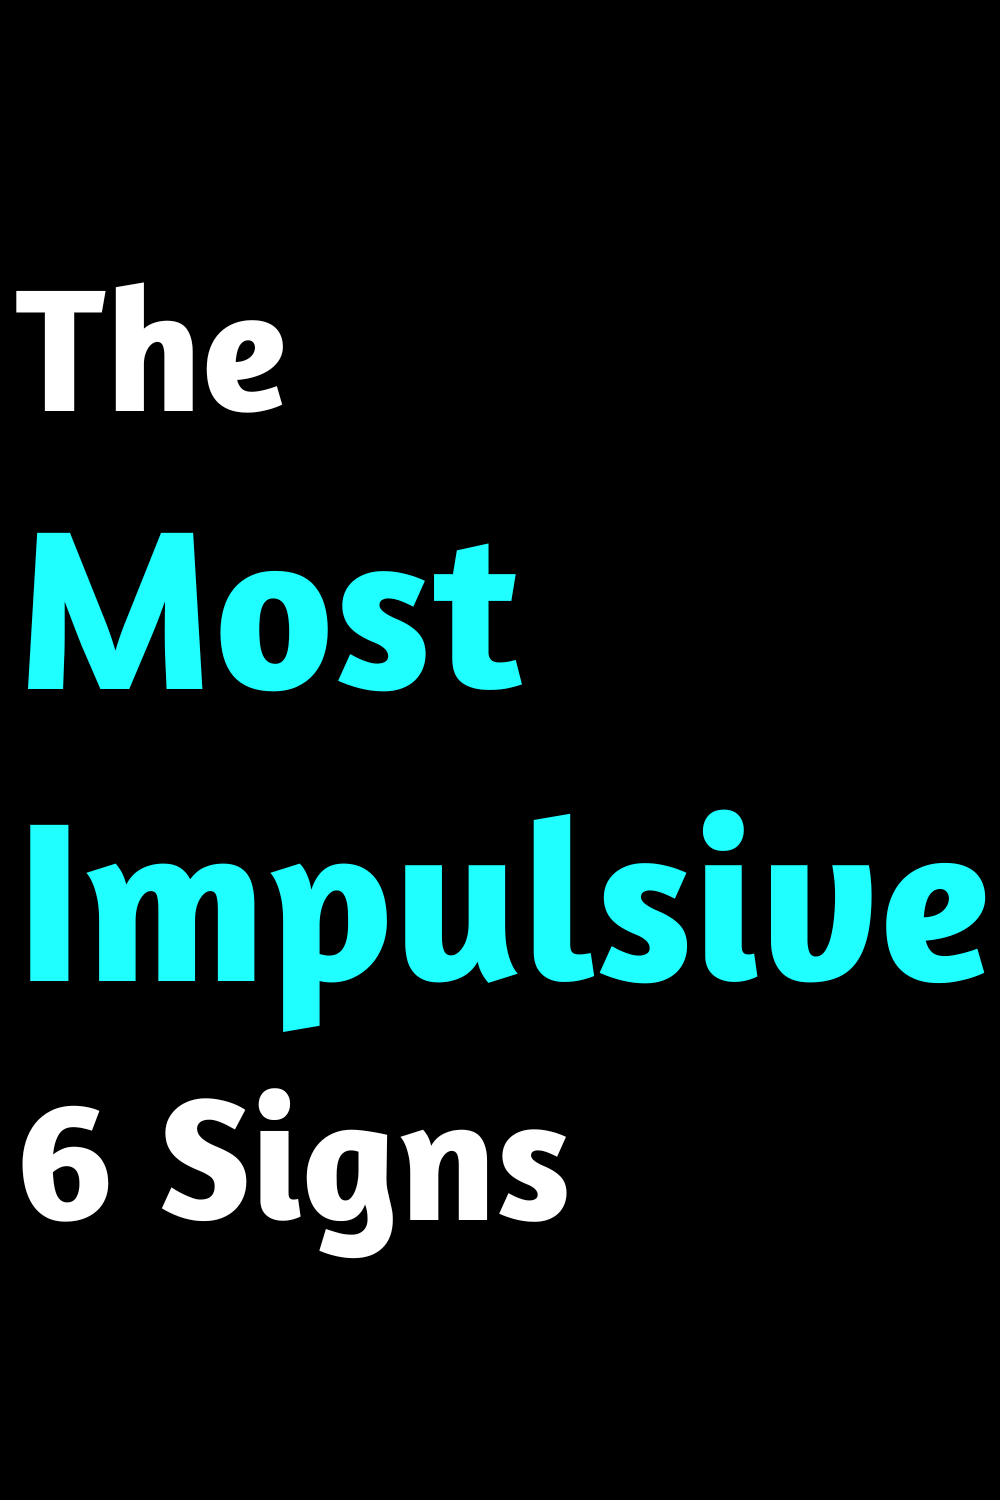 The Most Impulsive 6 Signs